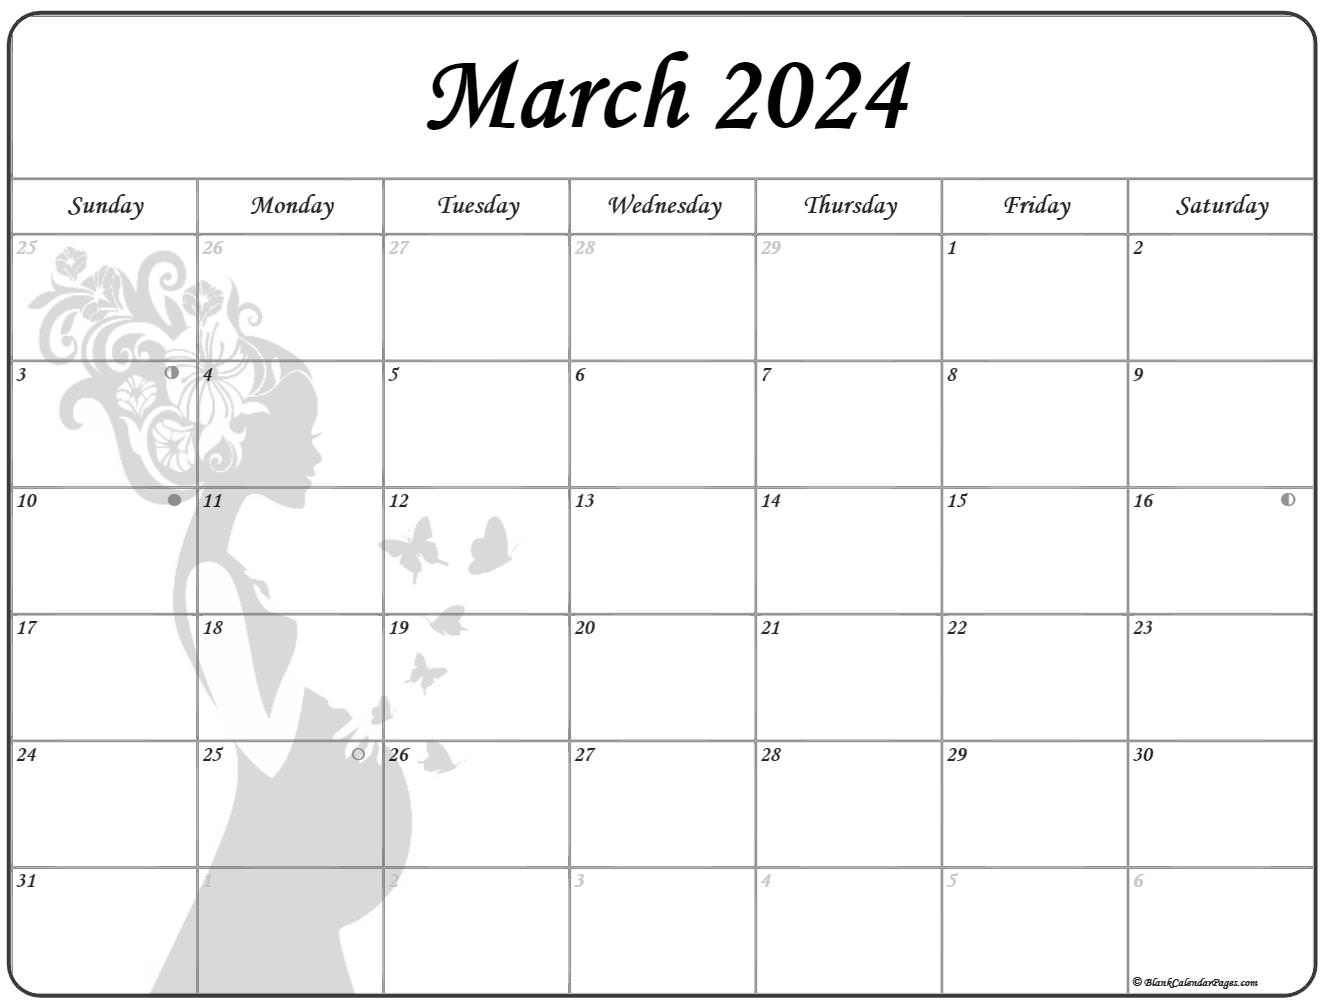 Collection of March 2022 photo calendars with image filters.